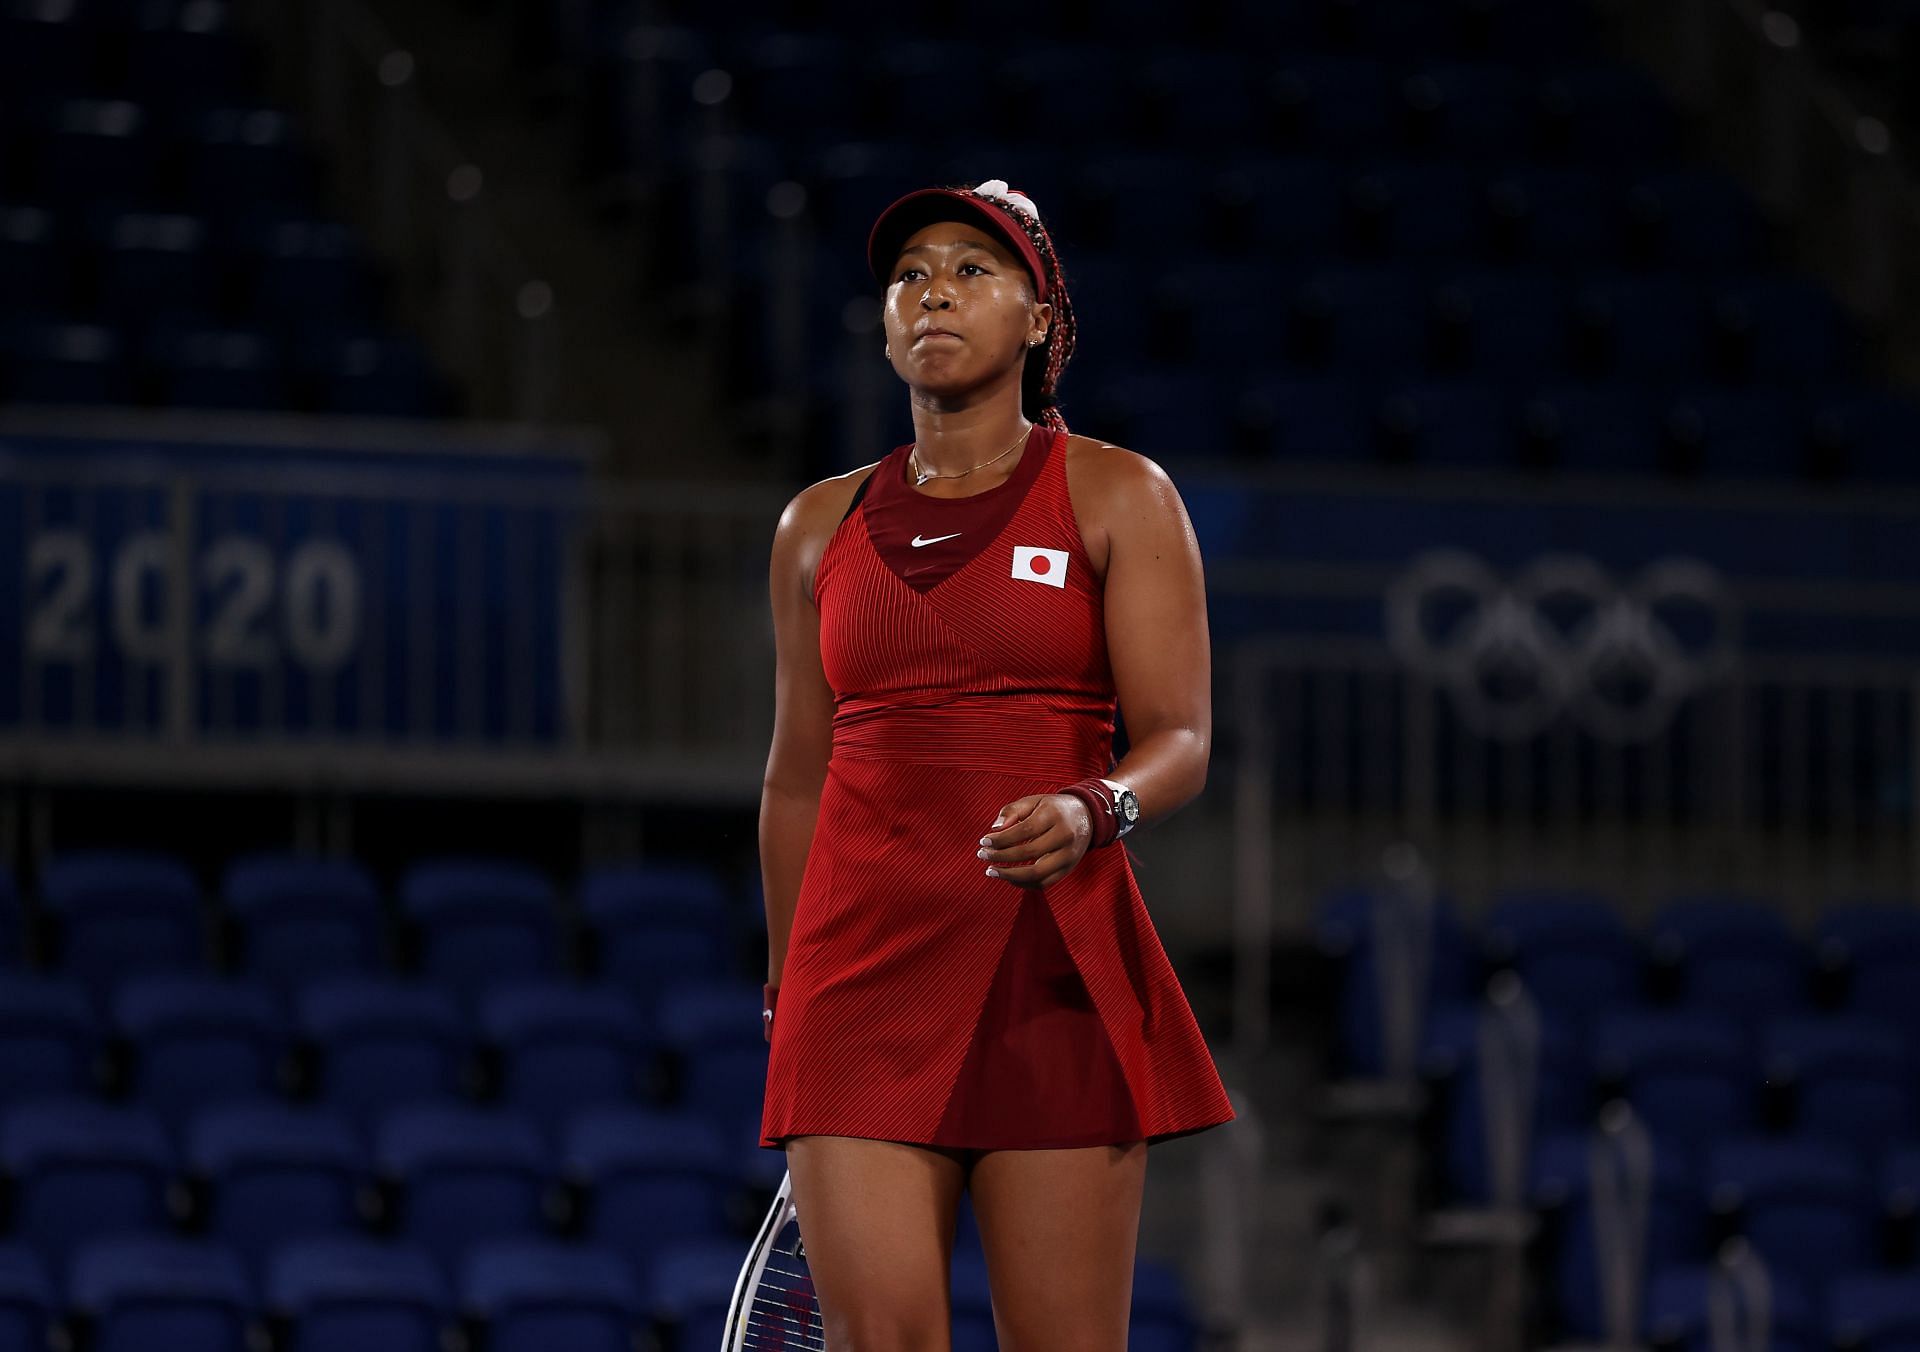 Naomi Osaka is currently on the sidelines recovering from an achilles injury